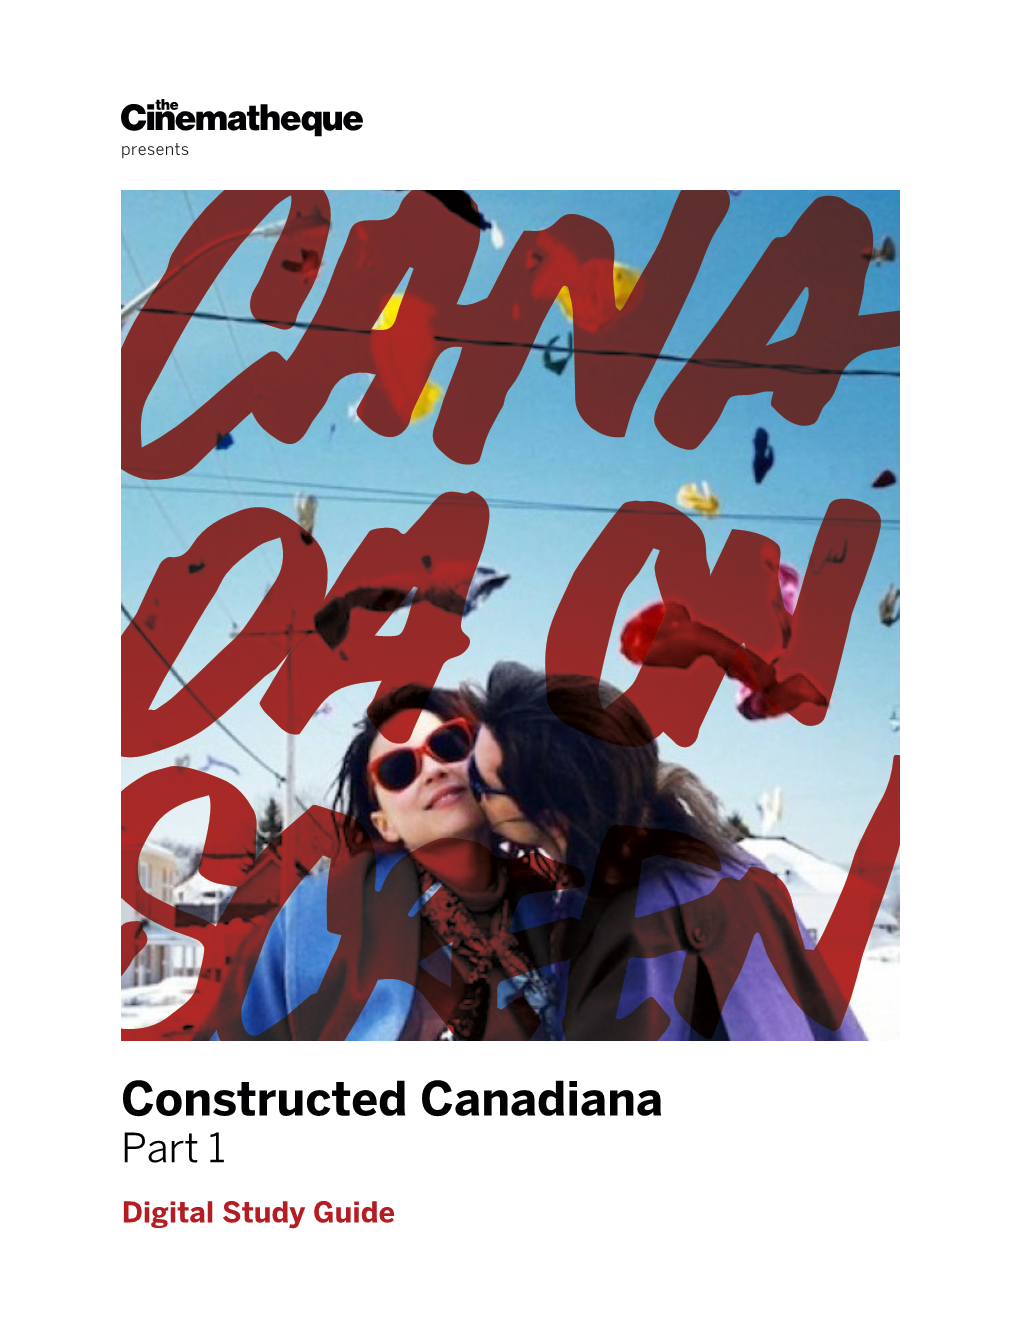 Constructed Canadiana Part 1